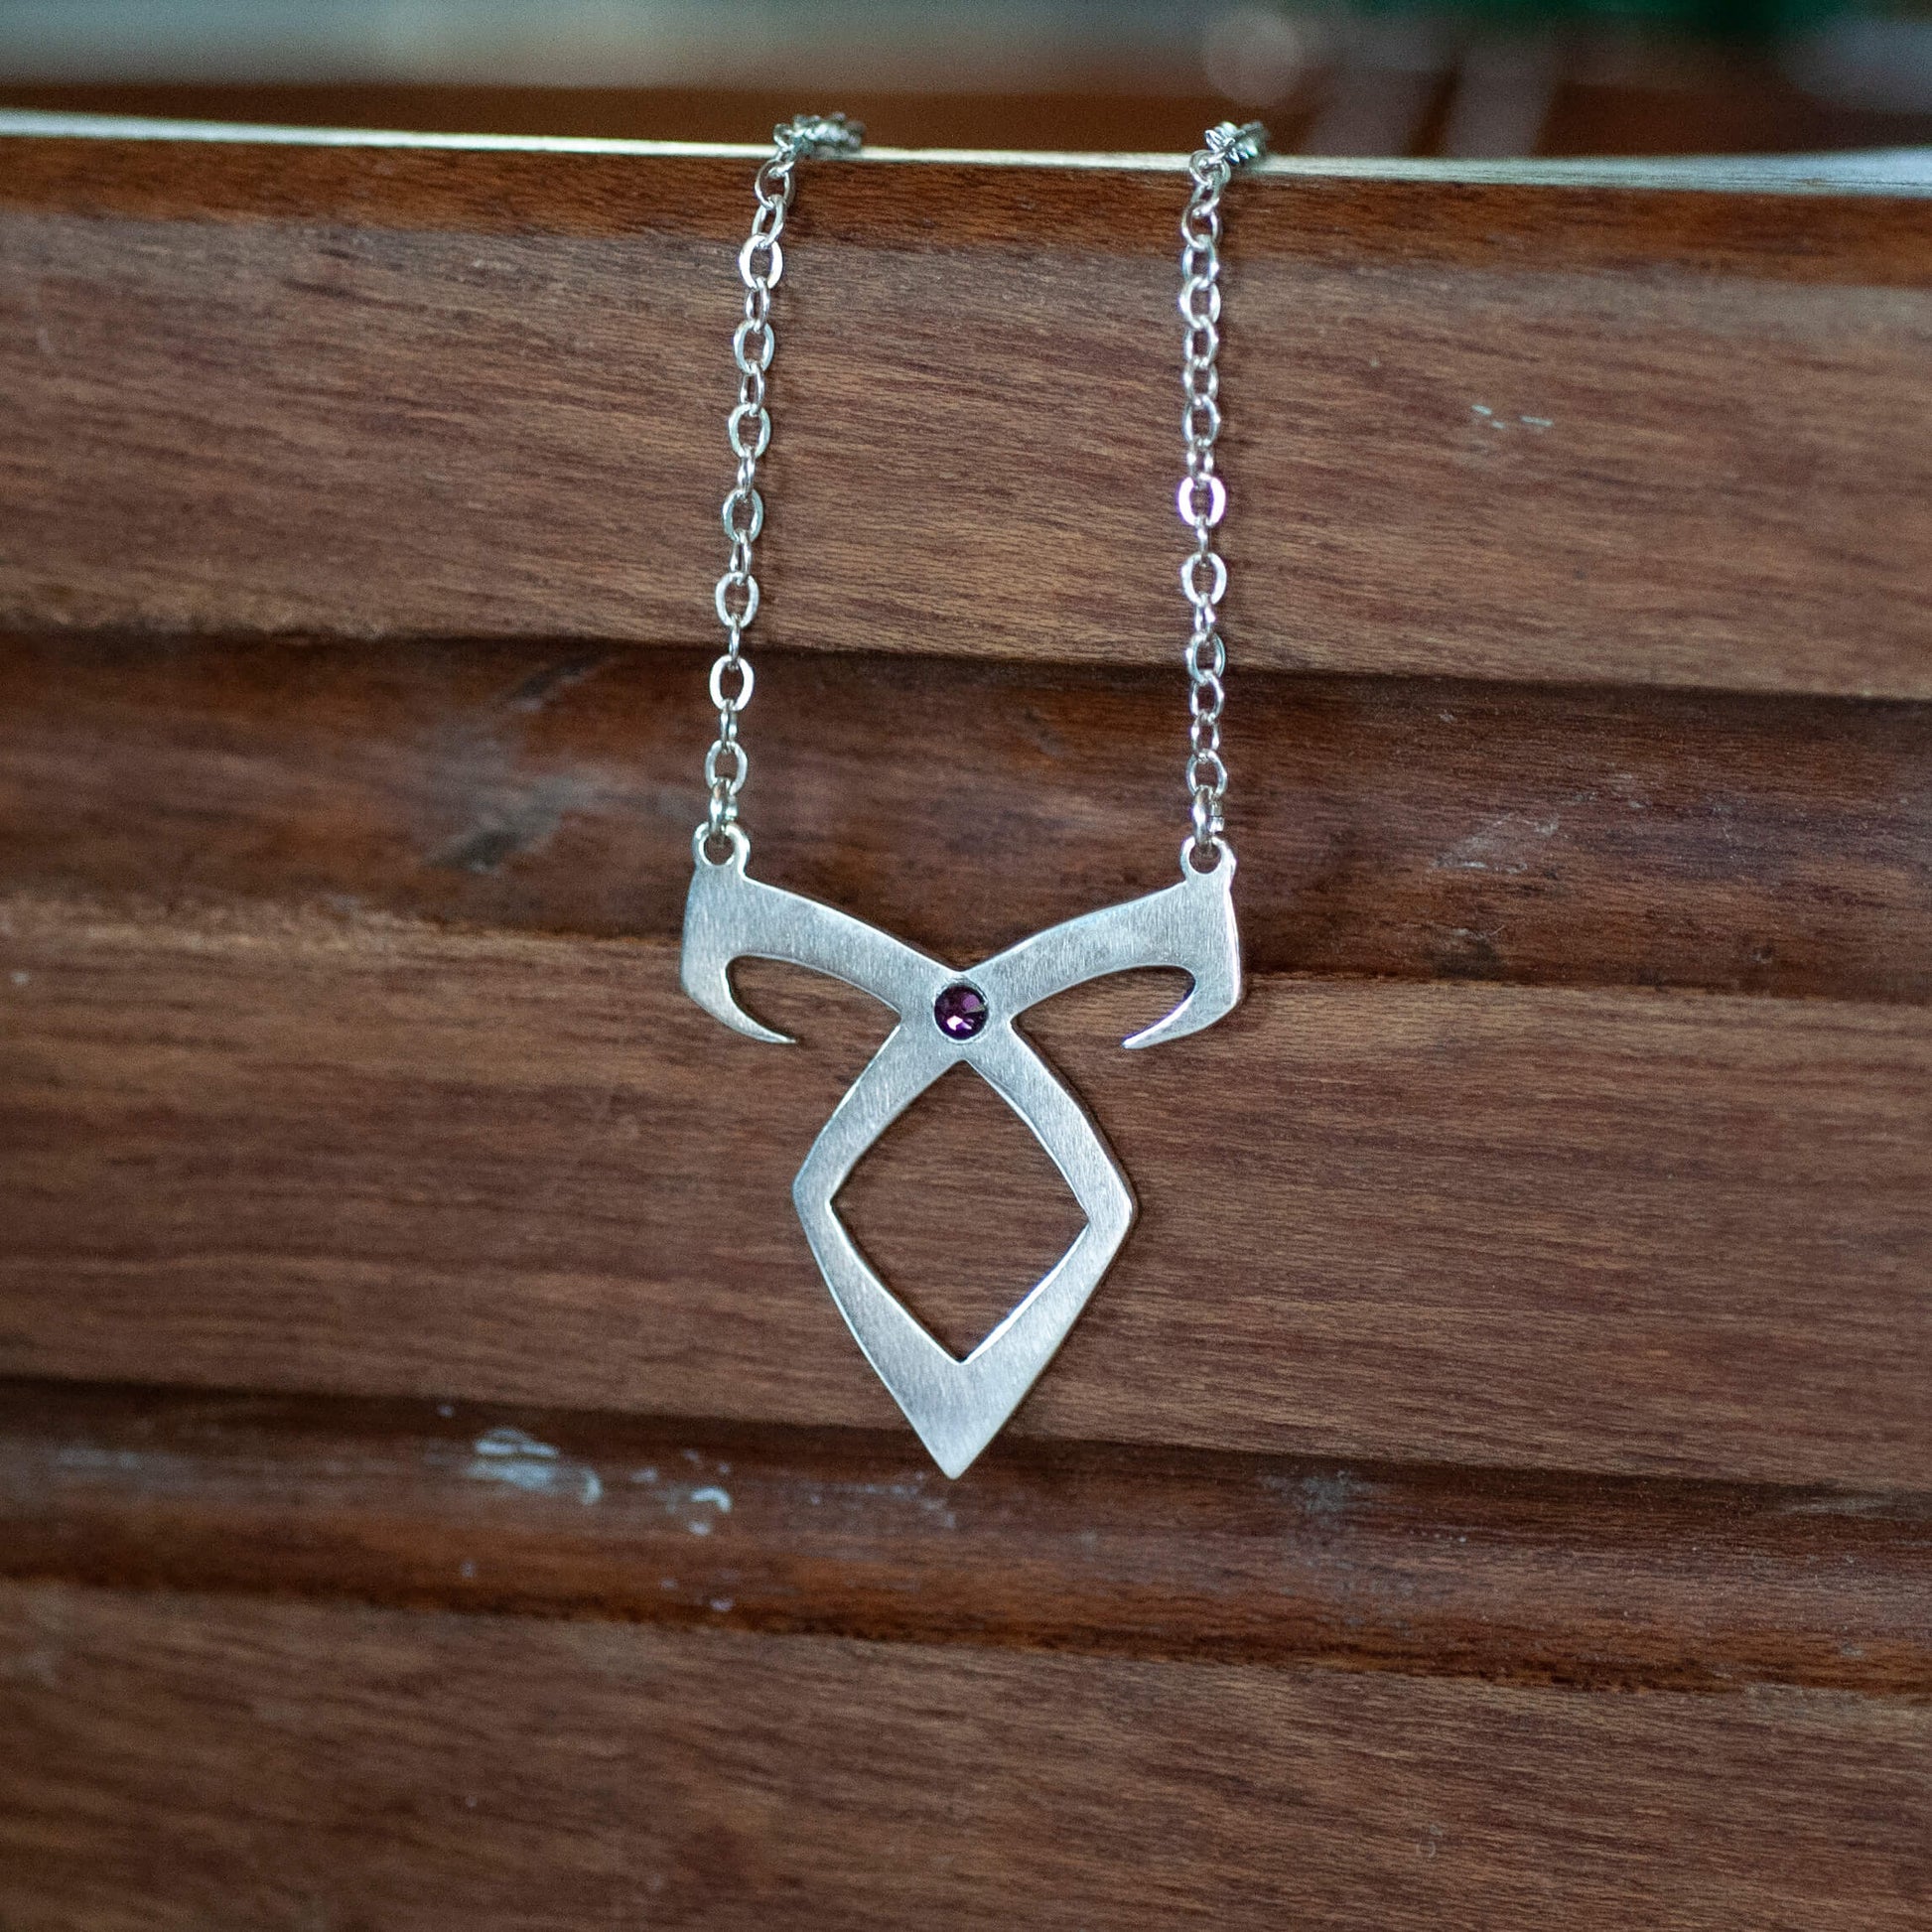 angelic power rune necklace, shadowhunters